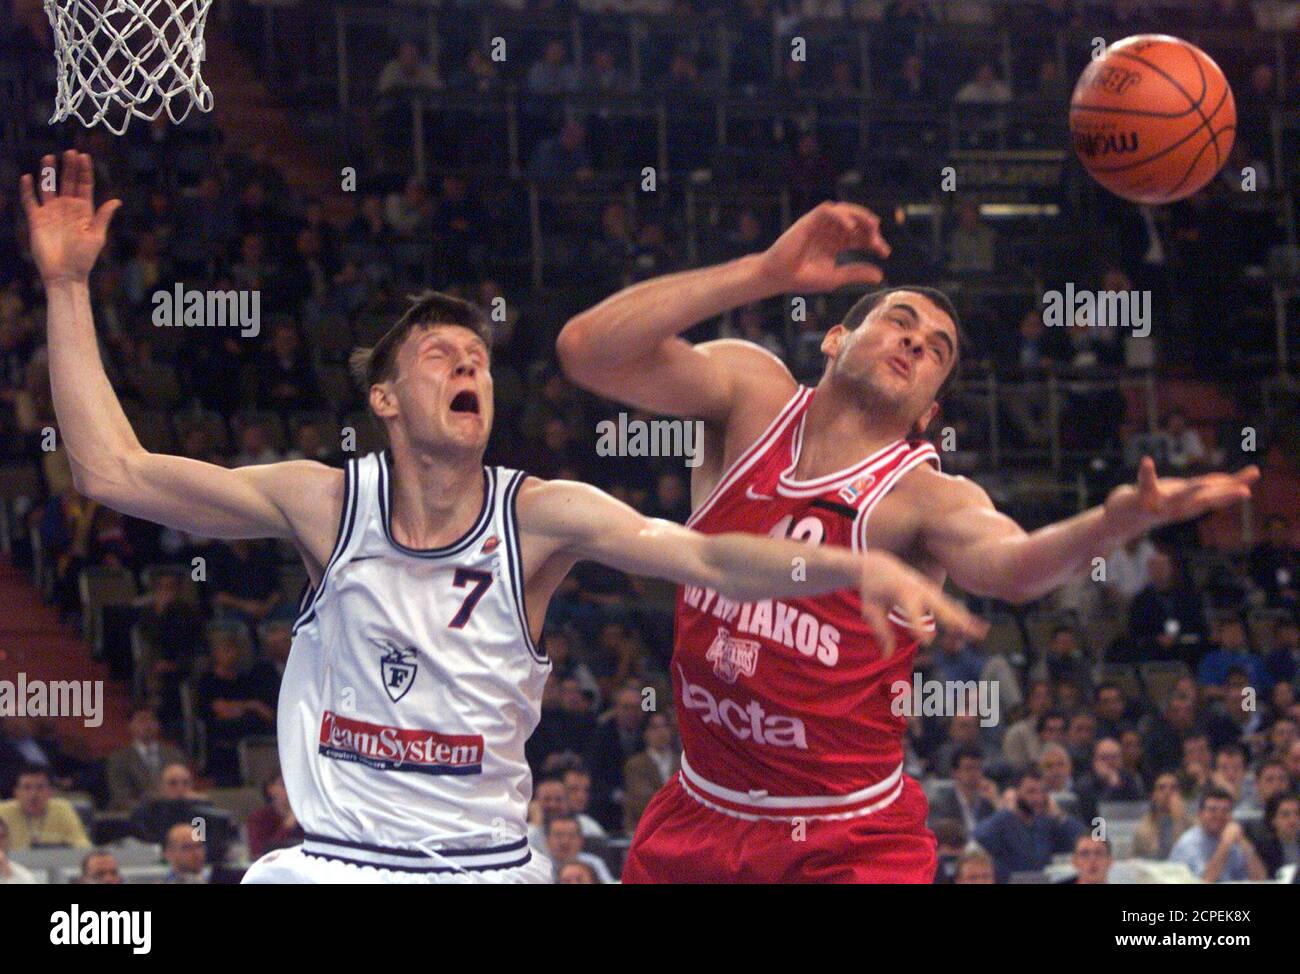 Greek Olympiakos' Piraeus Dragan Tarlac (R) fights for the ball with Gregor  Fucka (L) of Teamsystem Bologna during the first minutes of their match for  the third place in the Final Four